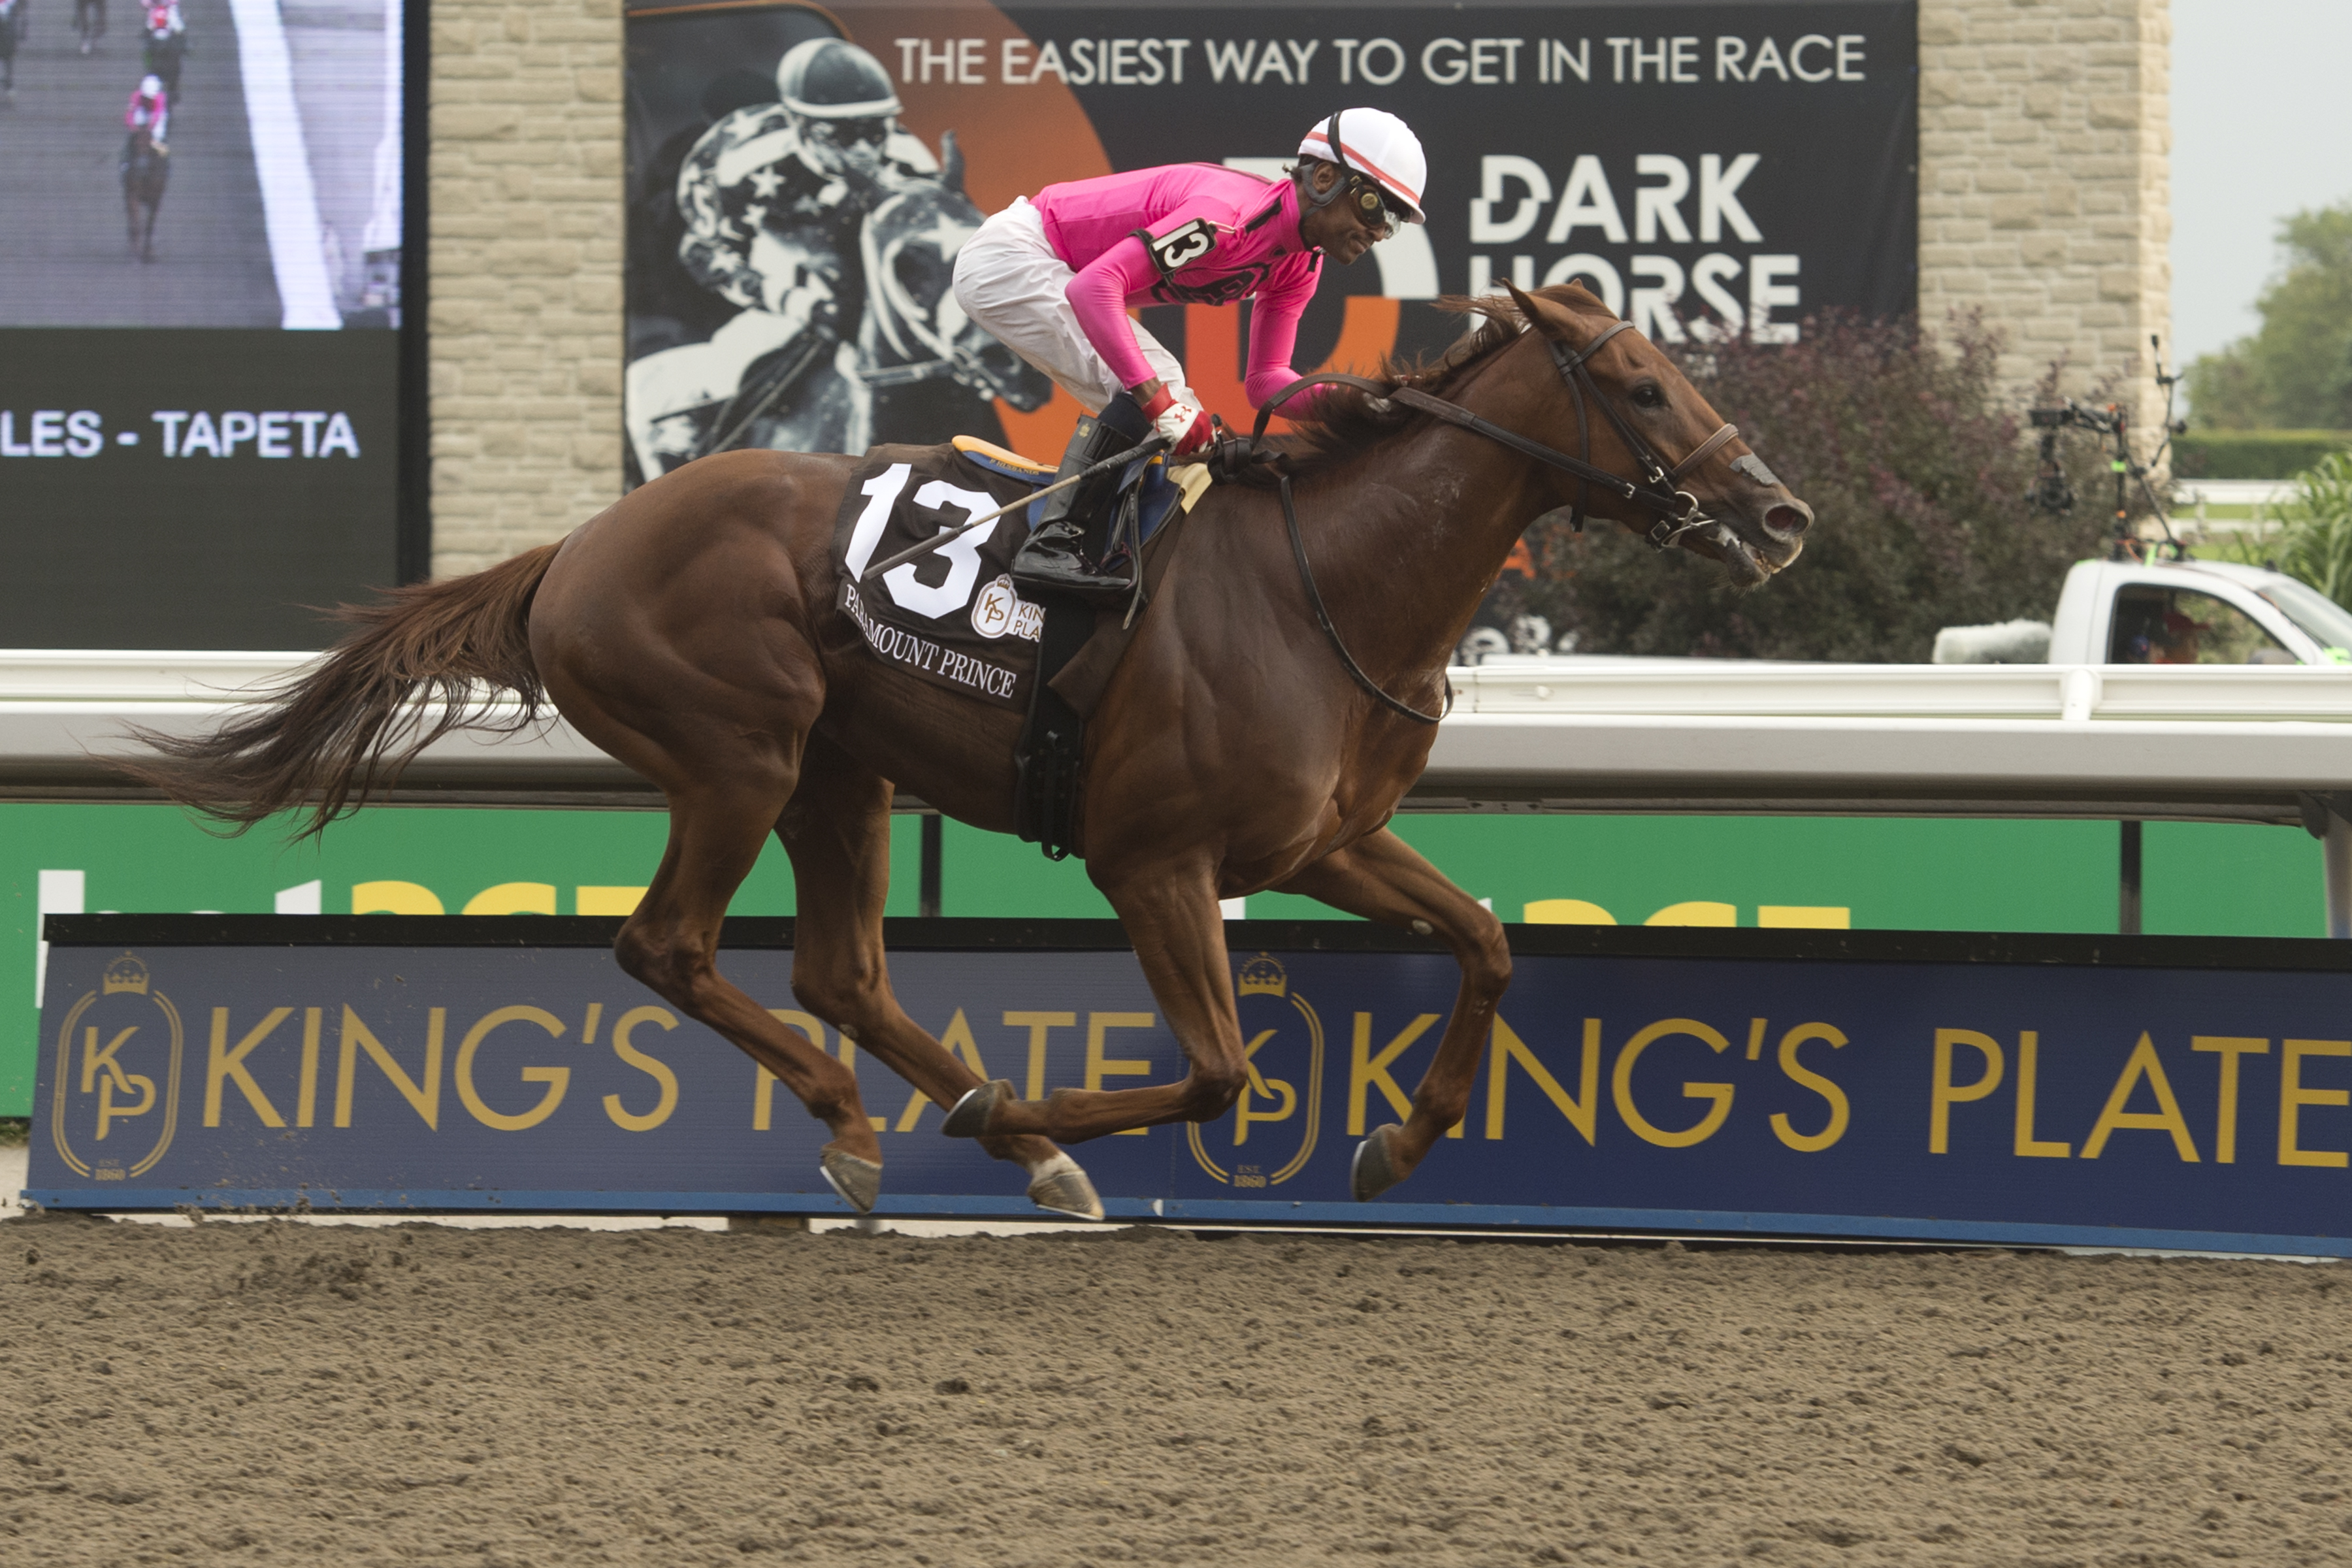 Paramount Prince Reigns Supreme in King’s Plate, Casse Finishes One-Two